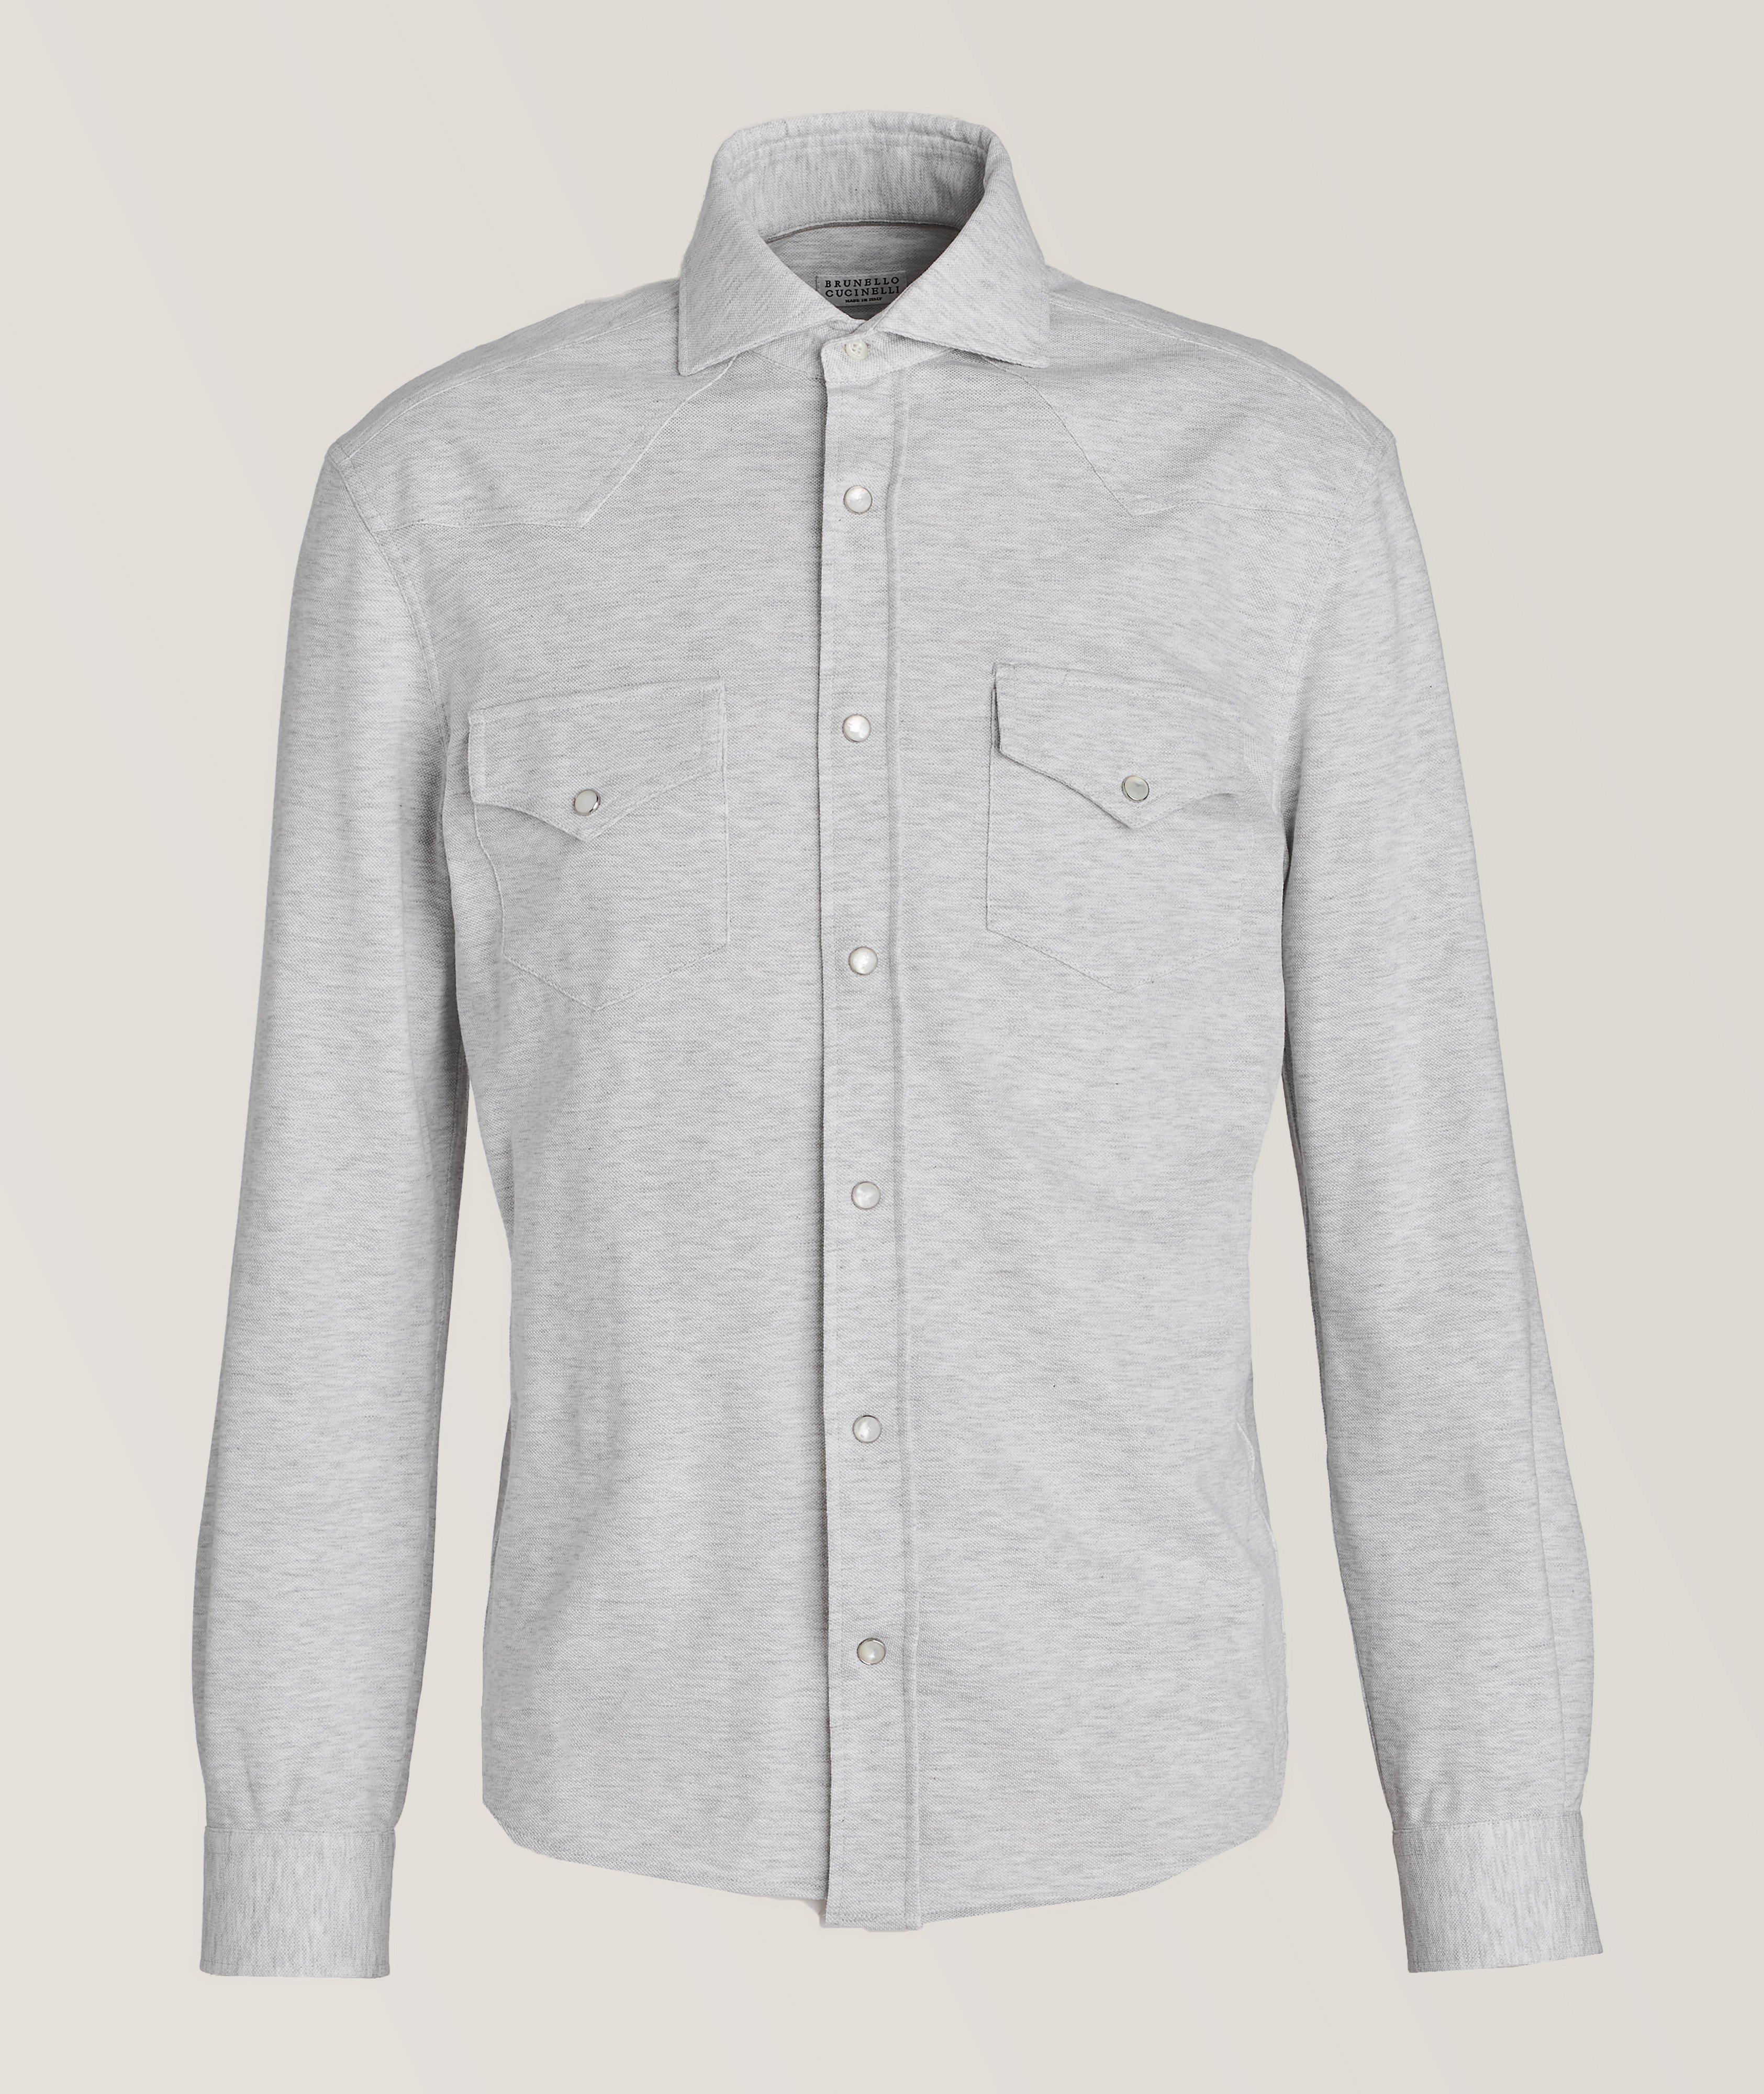 Western Cotton Leisure Fit Overshirt image 0